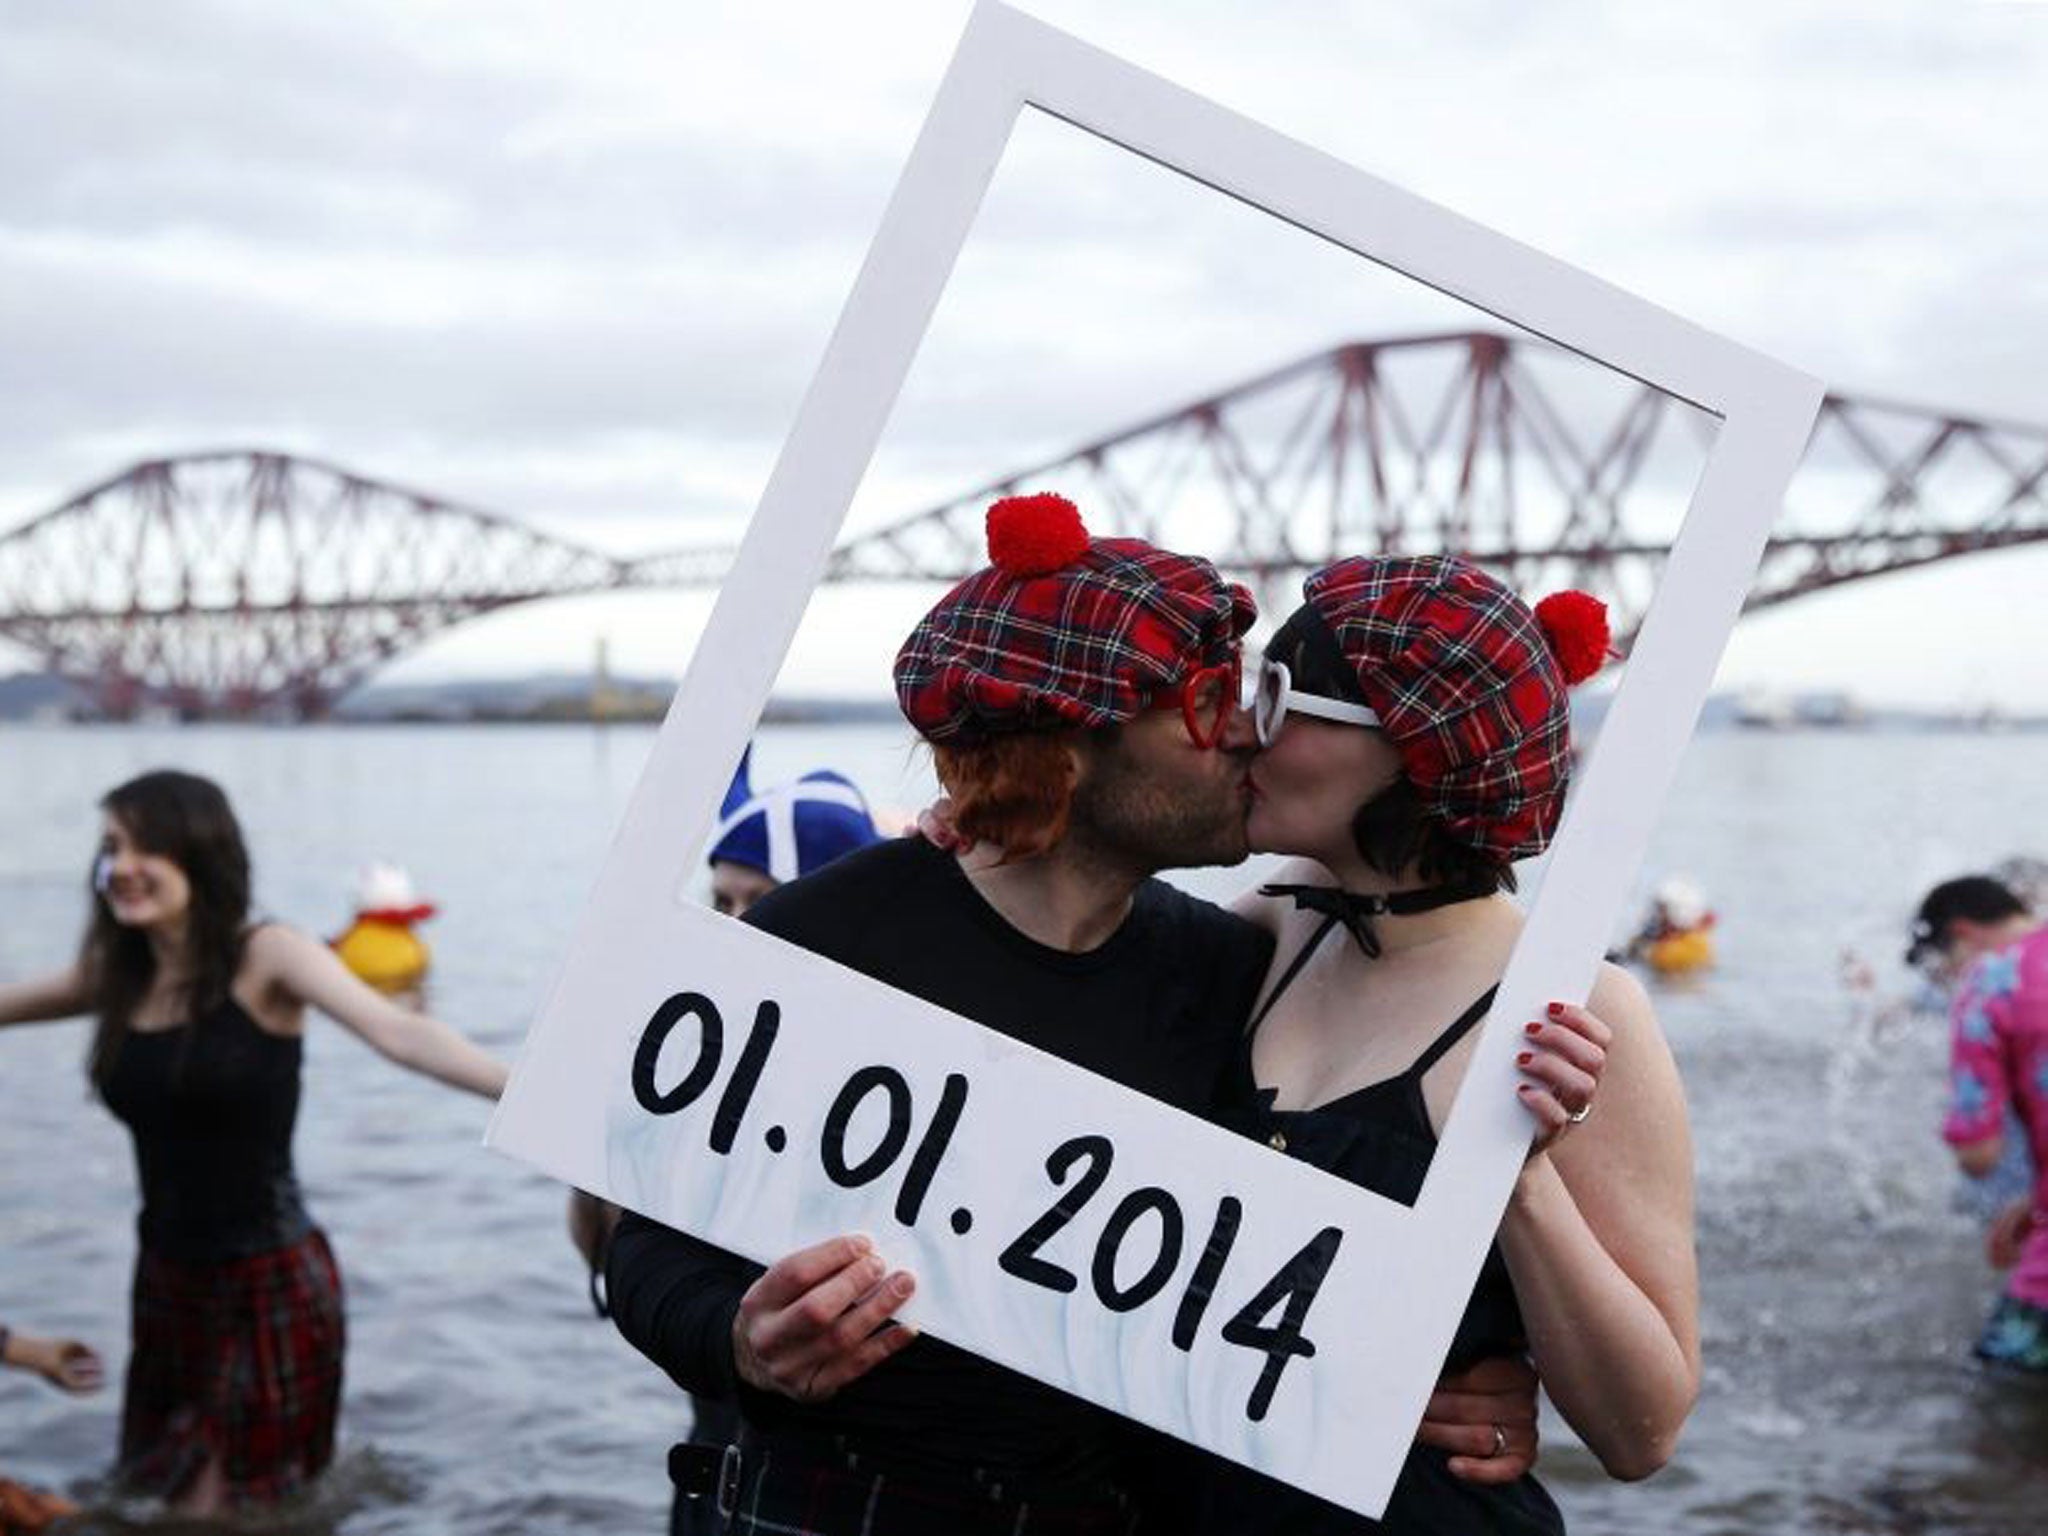 Swimmers in fancy dress participate in the New Year's Day Looney Dook swim at South Queensferry, Scotland